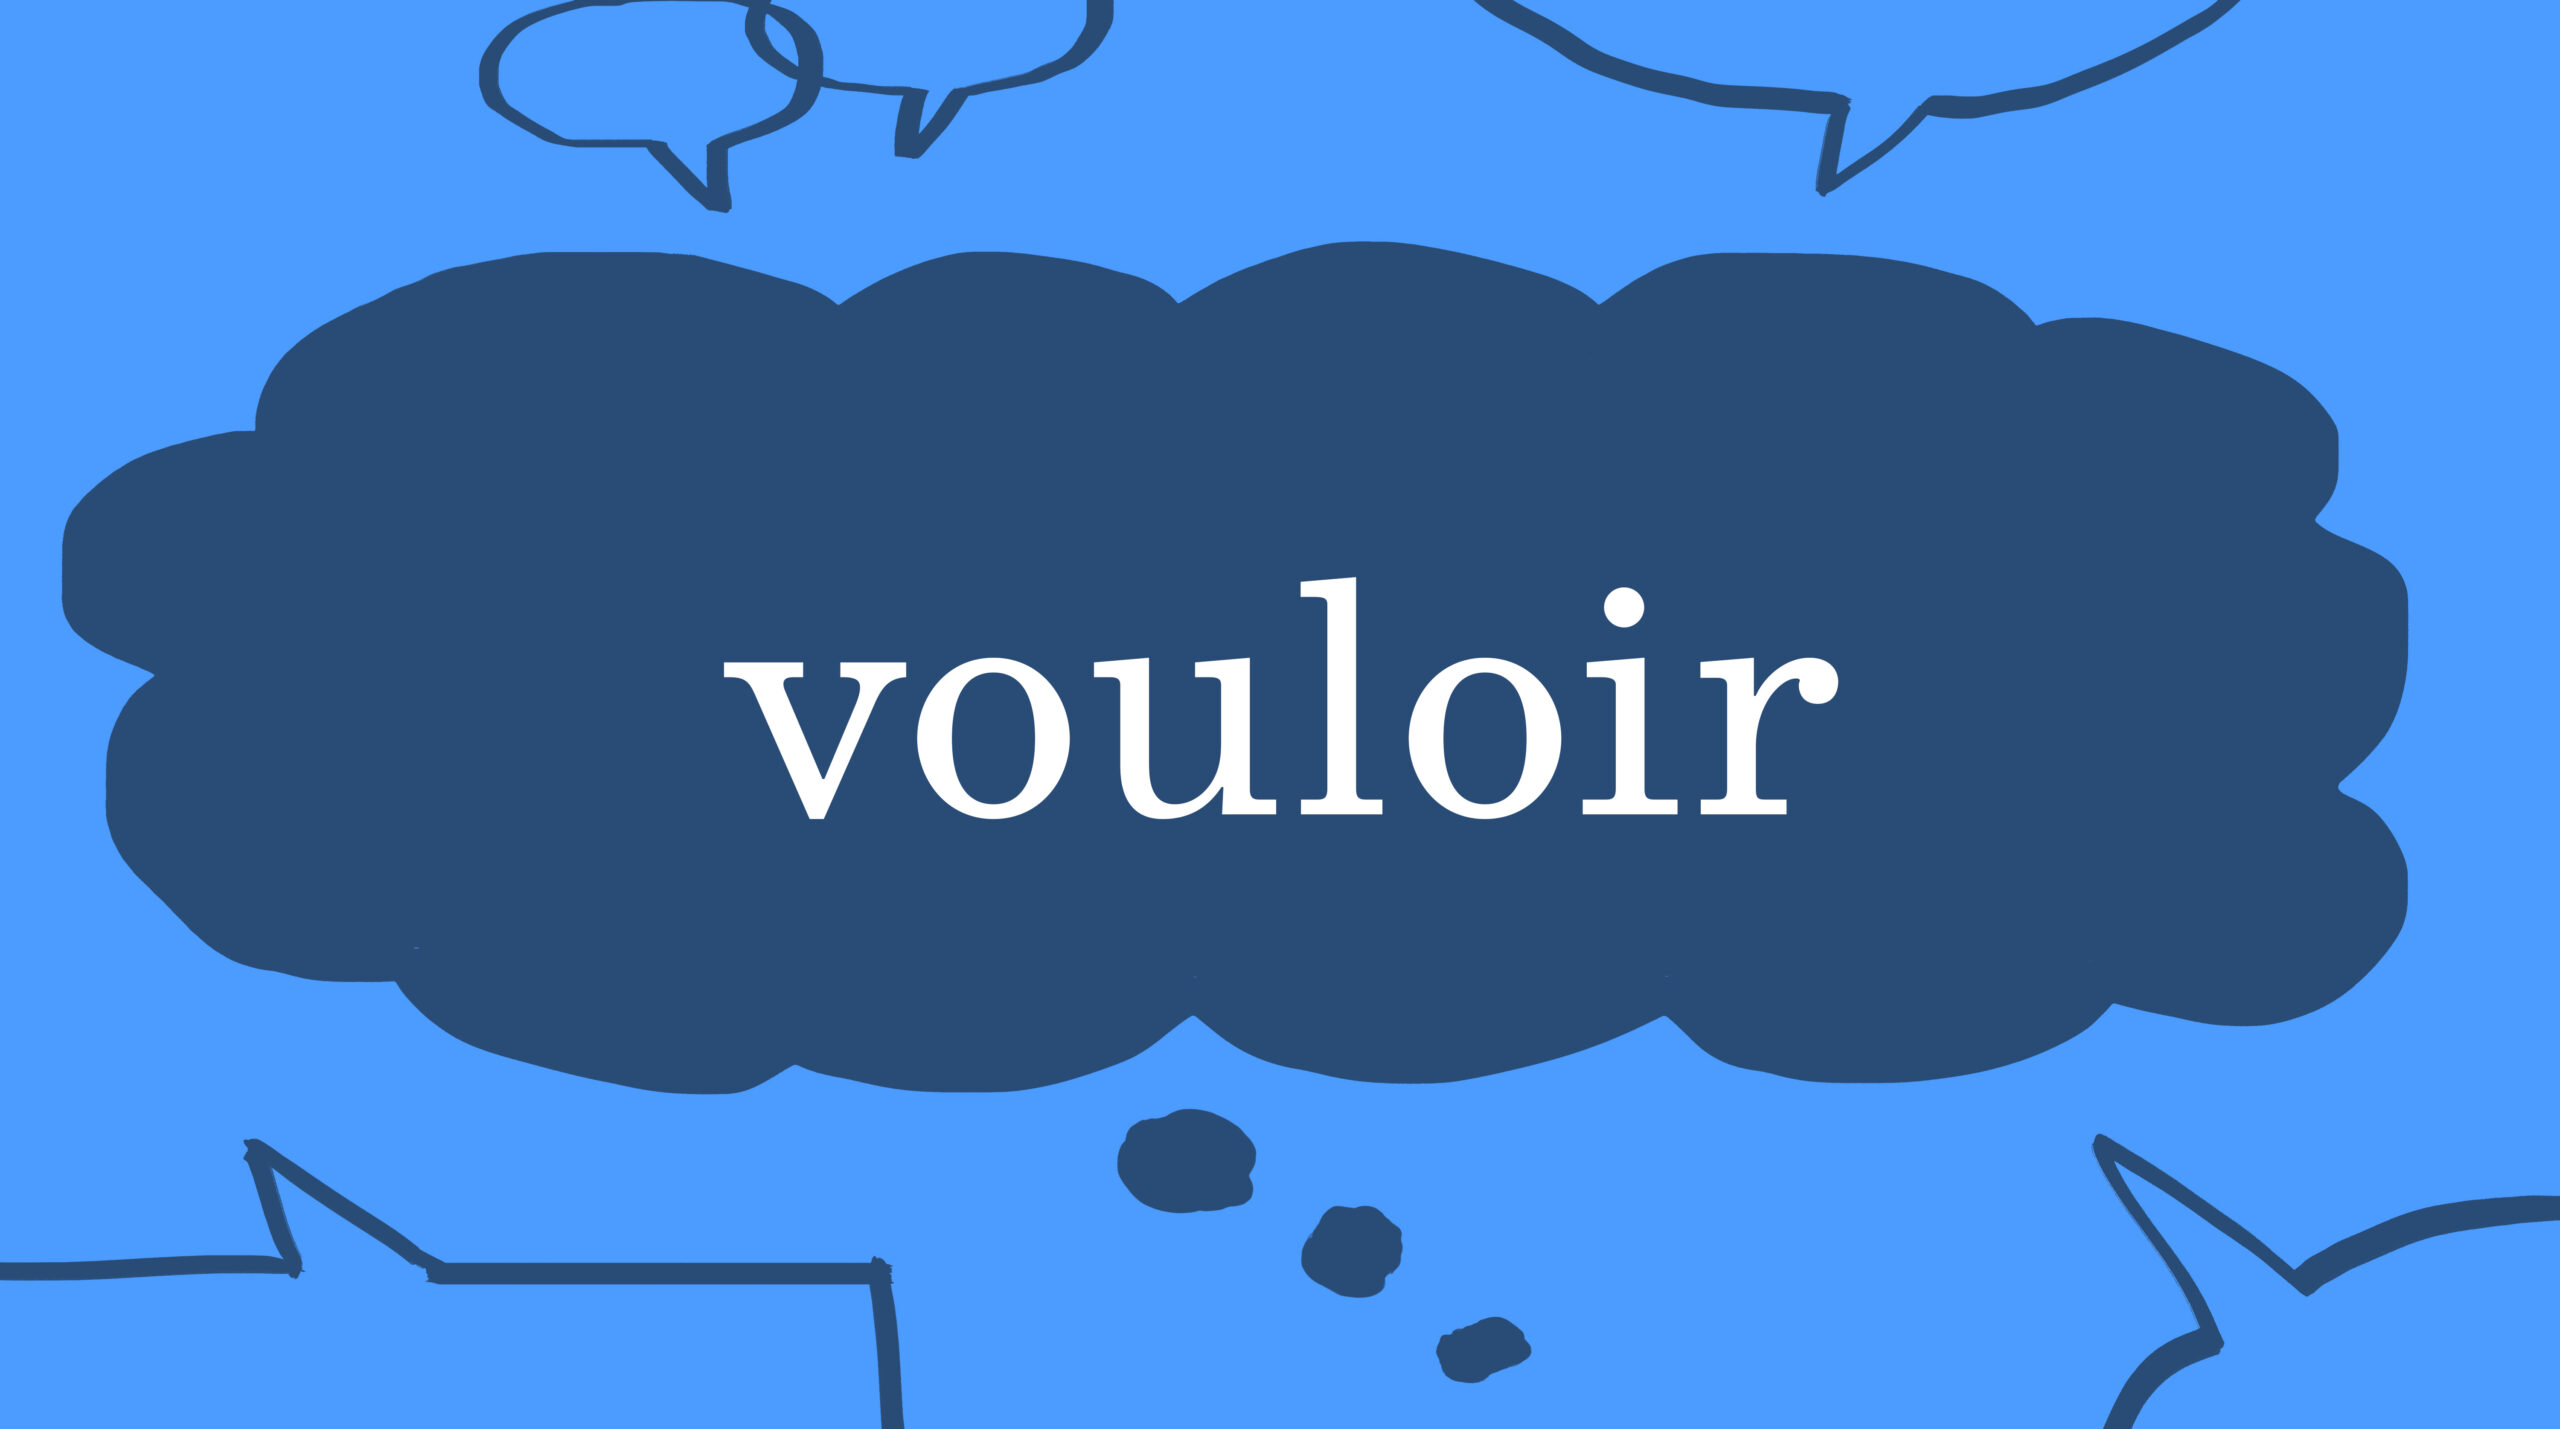 French word of the week: vouloir - Collins Dictionary Language Blog